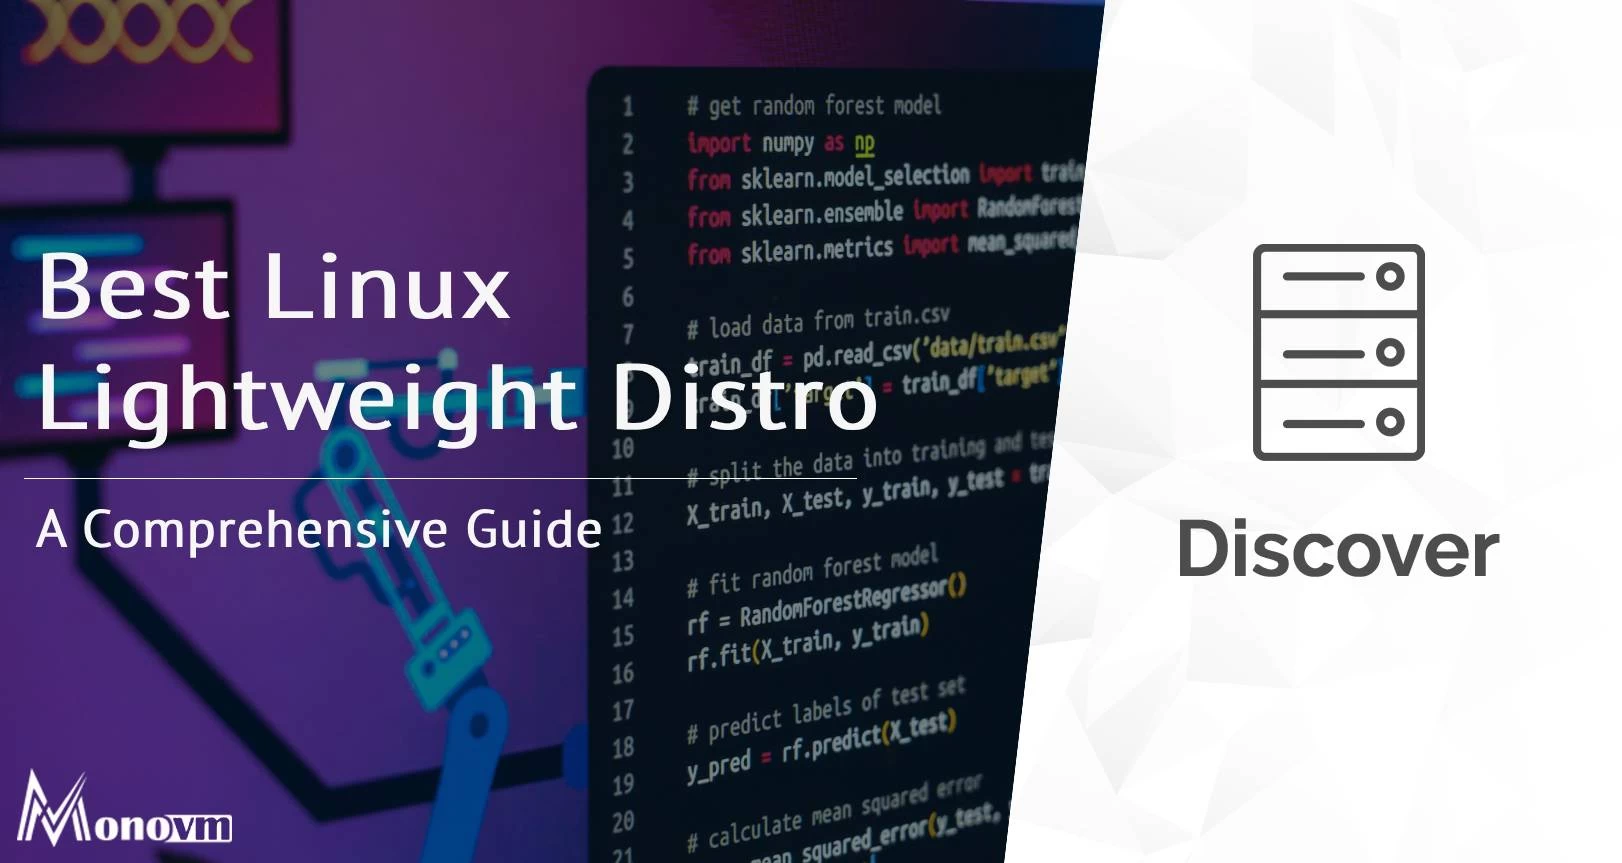 The Quest for the Best Linux Lightweight Distro